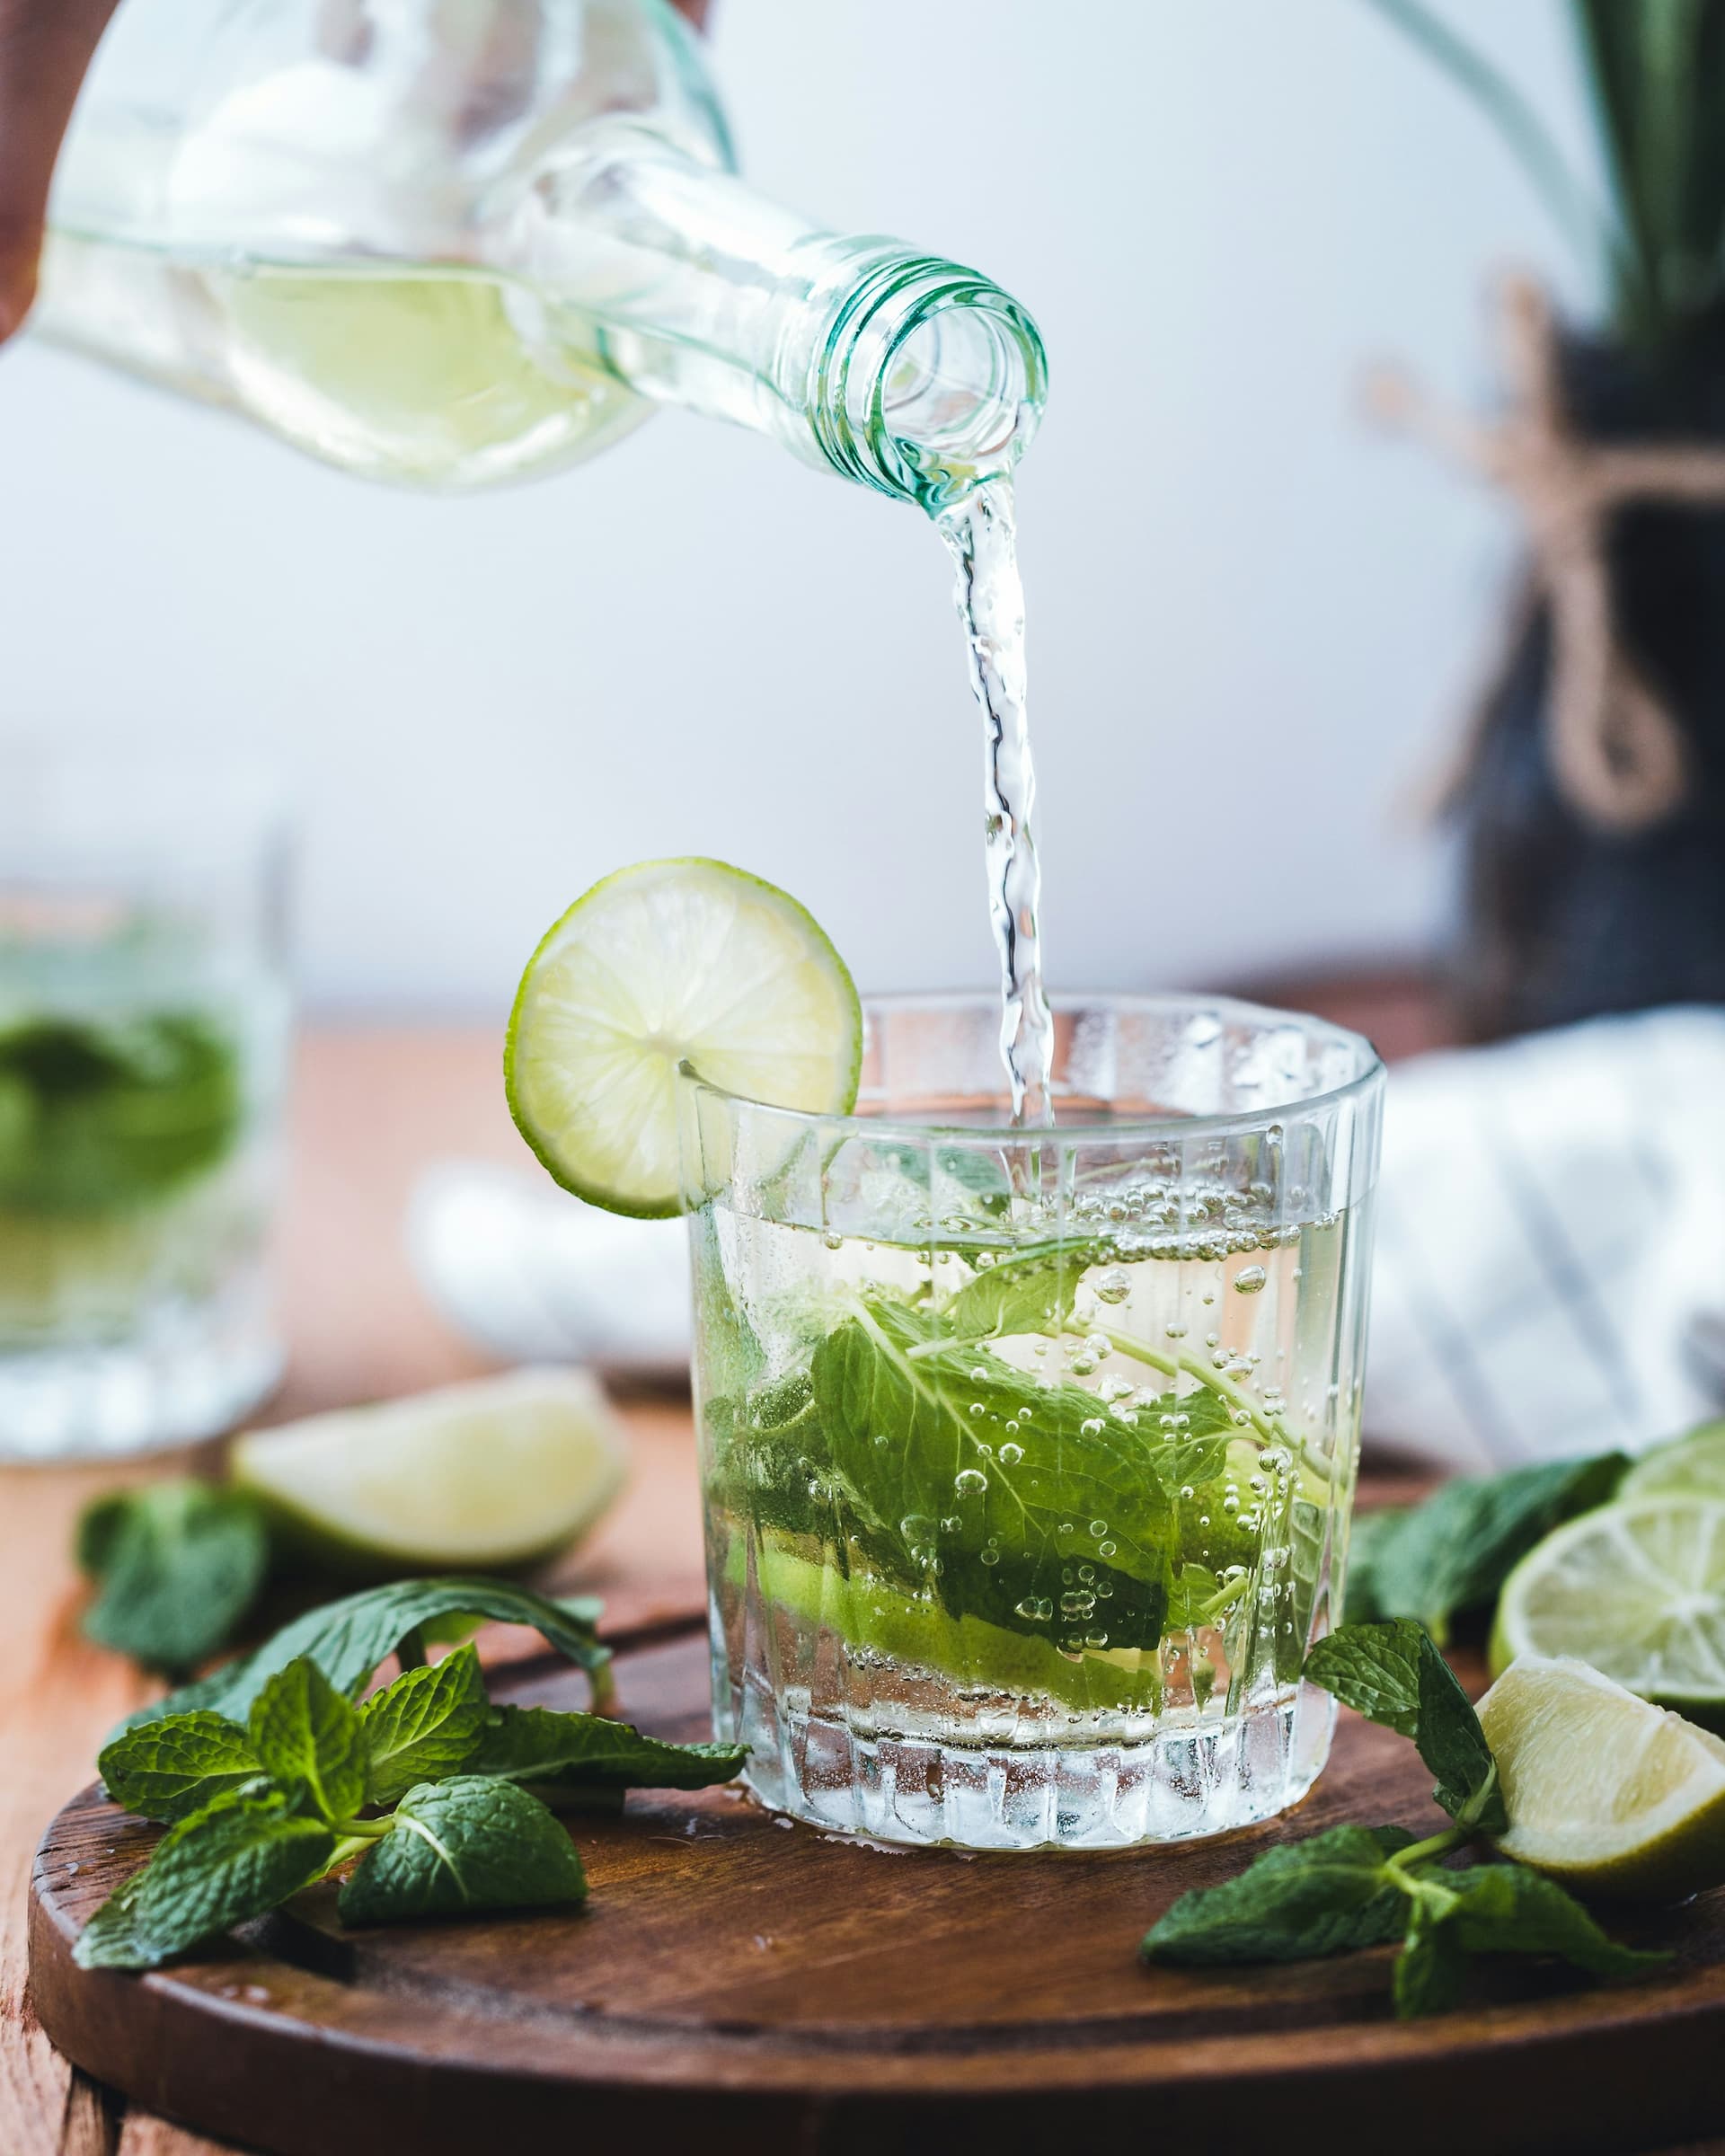 Your Guide To Hosting an Aam Panna-themed Summer Cocktail Party